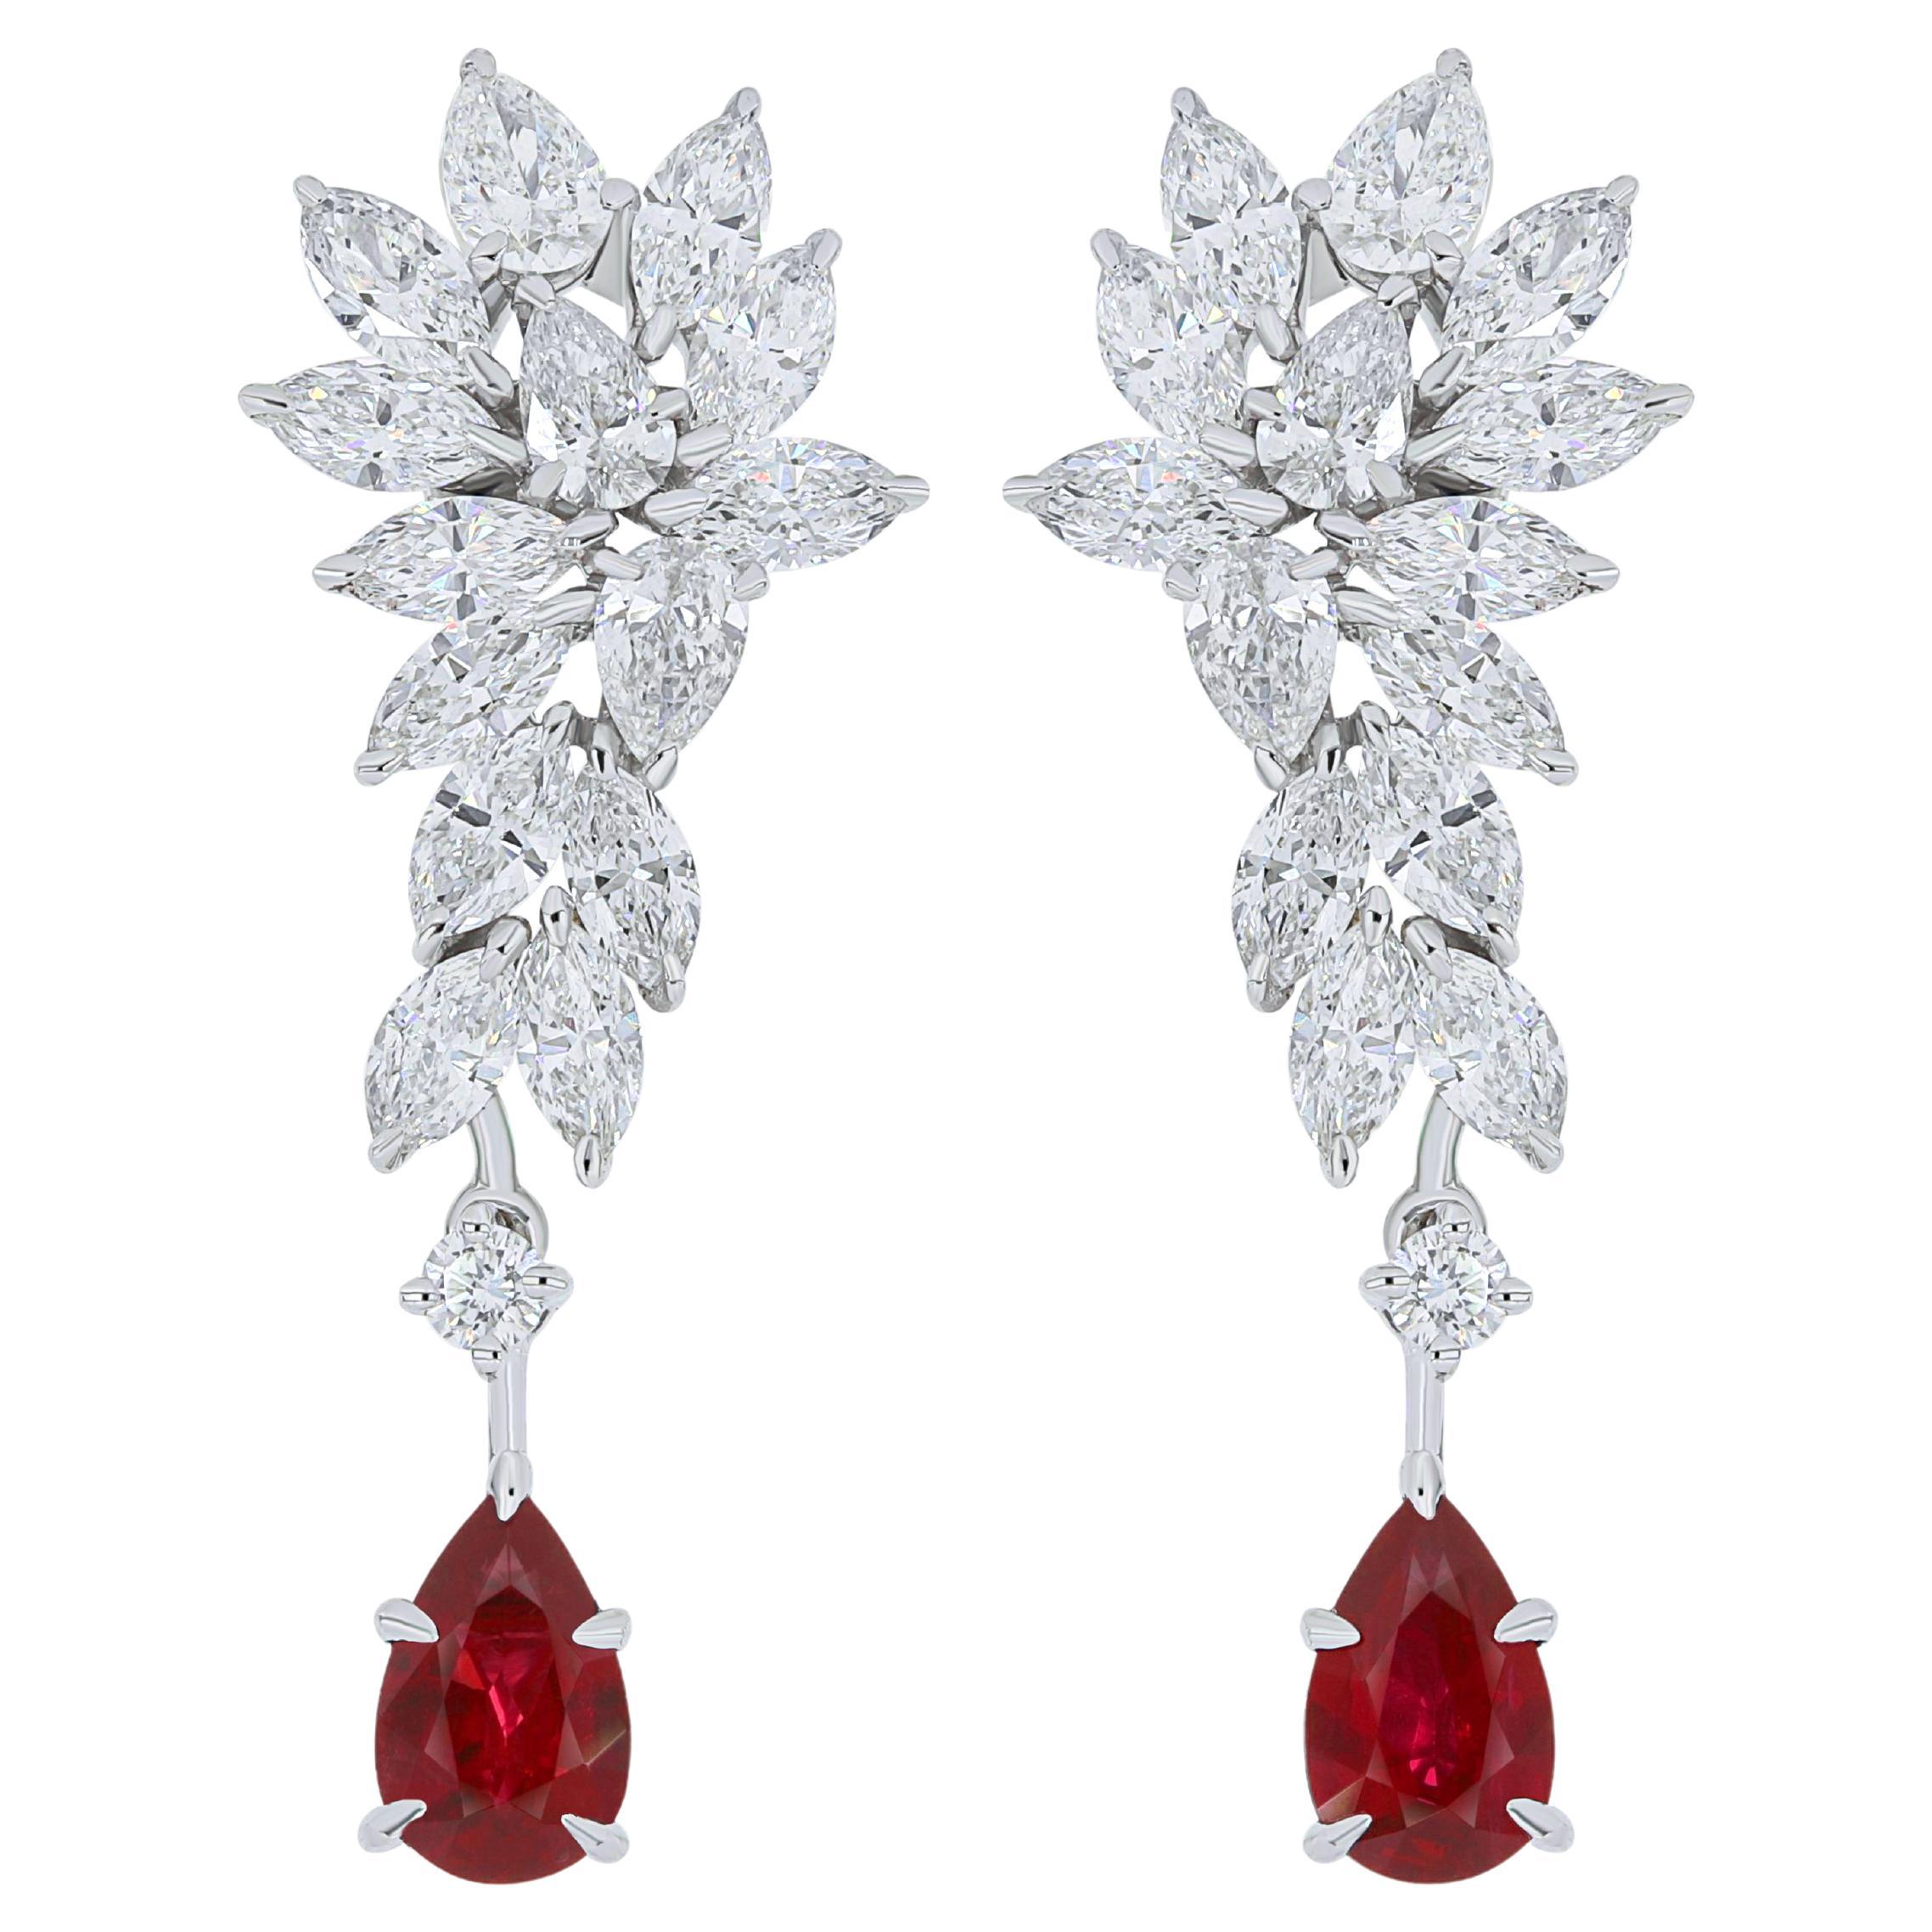 Mozambique Ruby and Diamond Studded handcraft Earrings in 18 Karat White Gold 